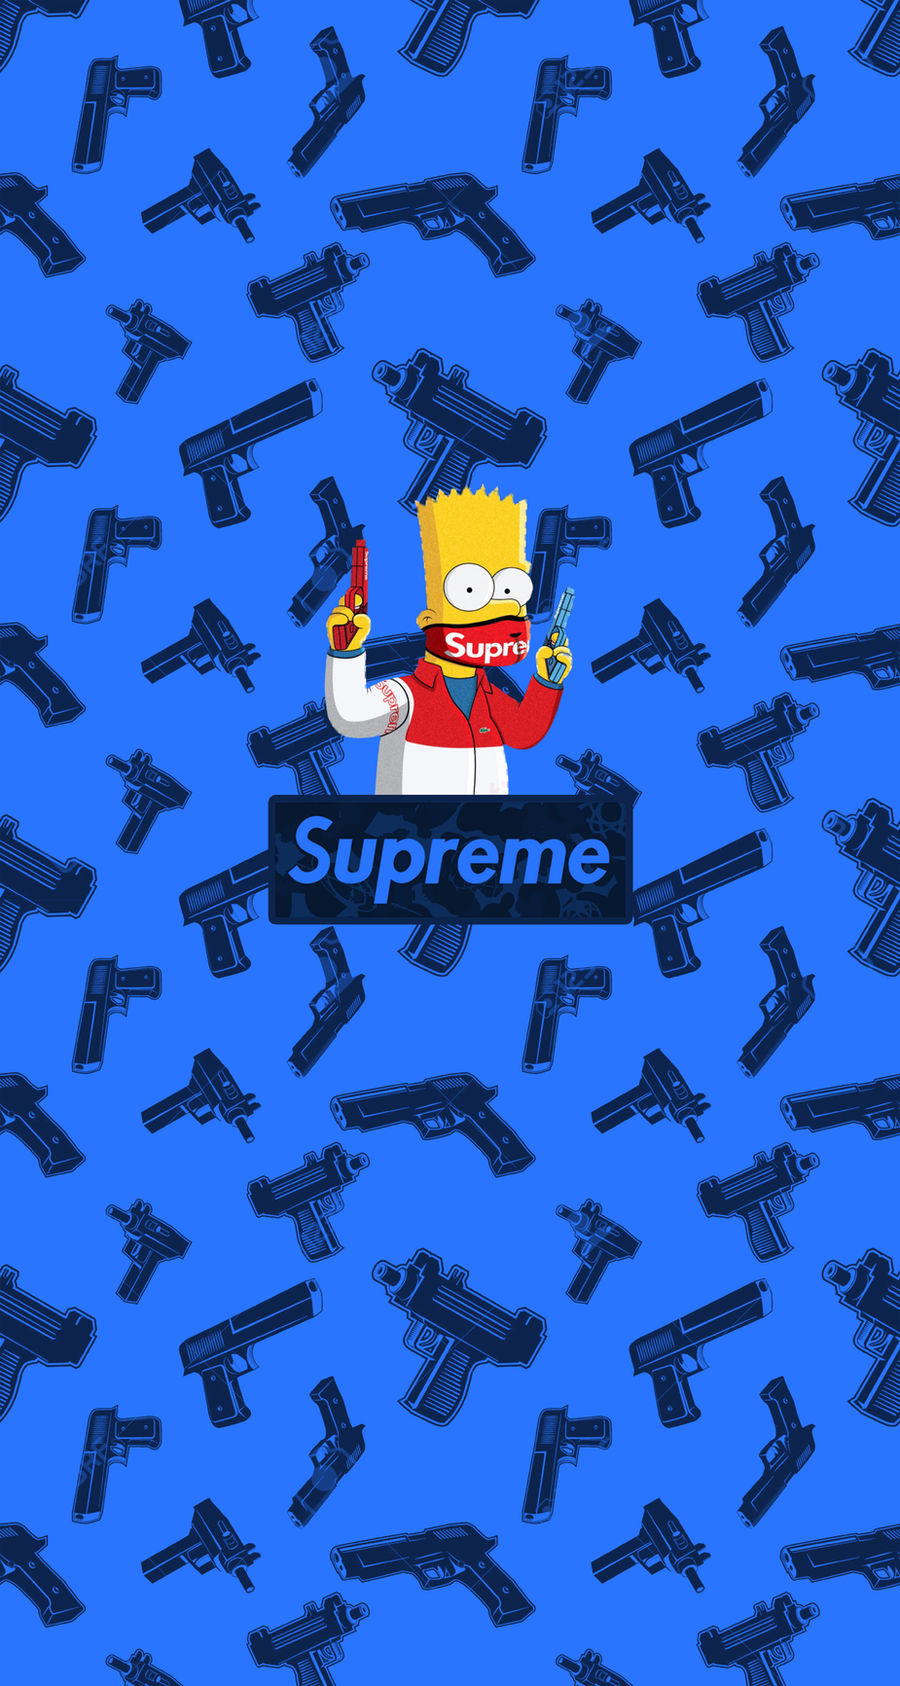 Supreme X Simpsons Iphone Wallpaper By Krongraphics On Deviantart